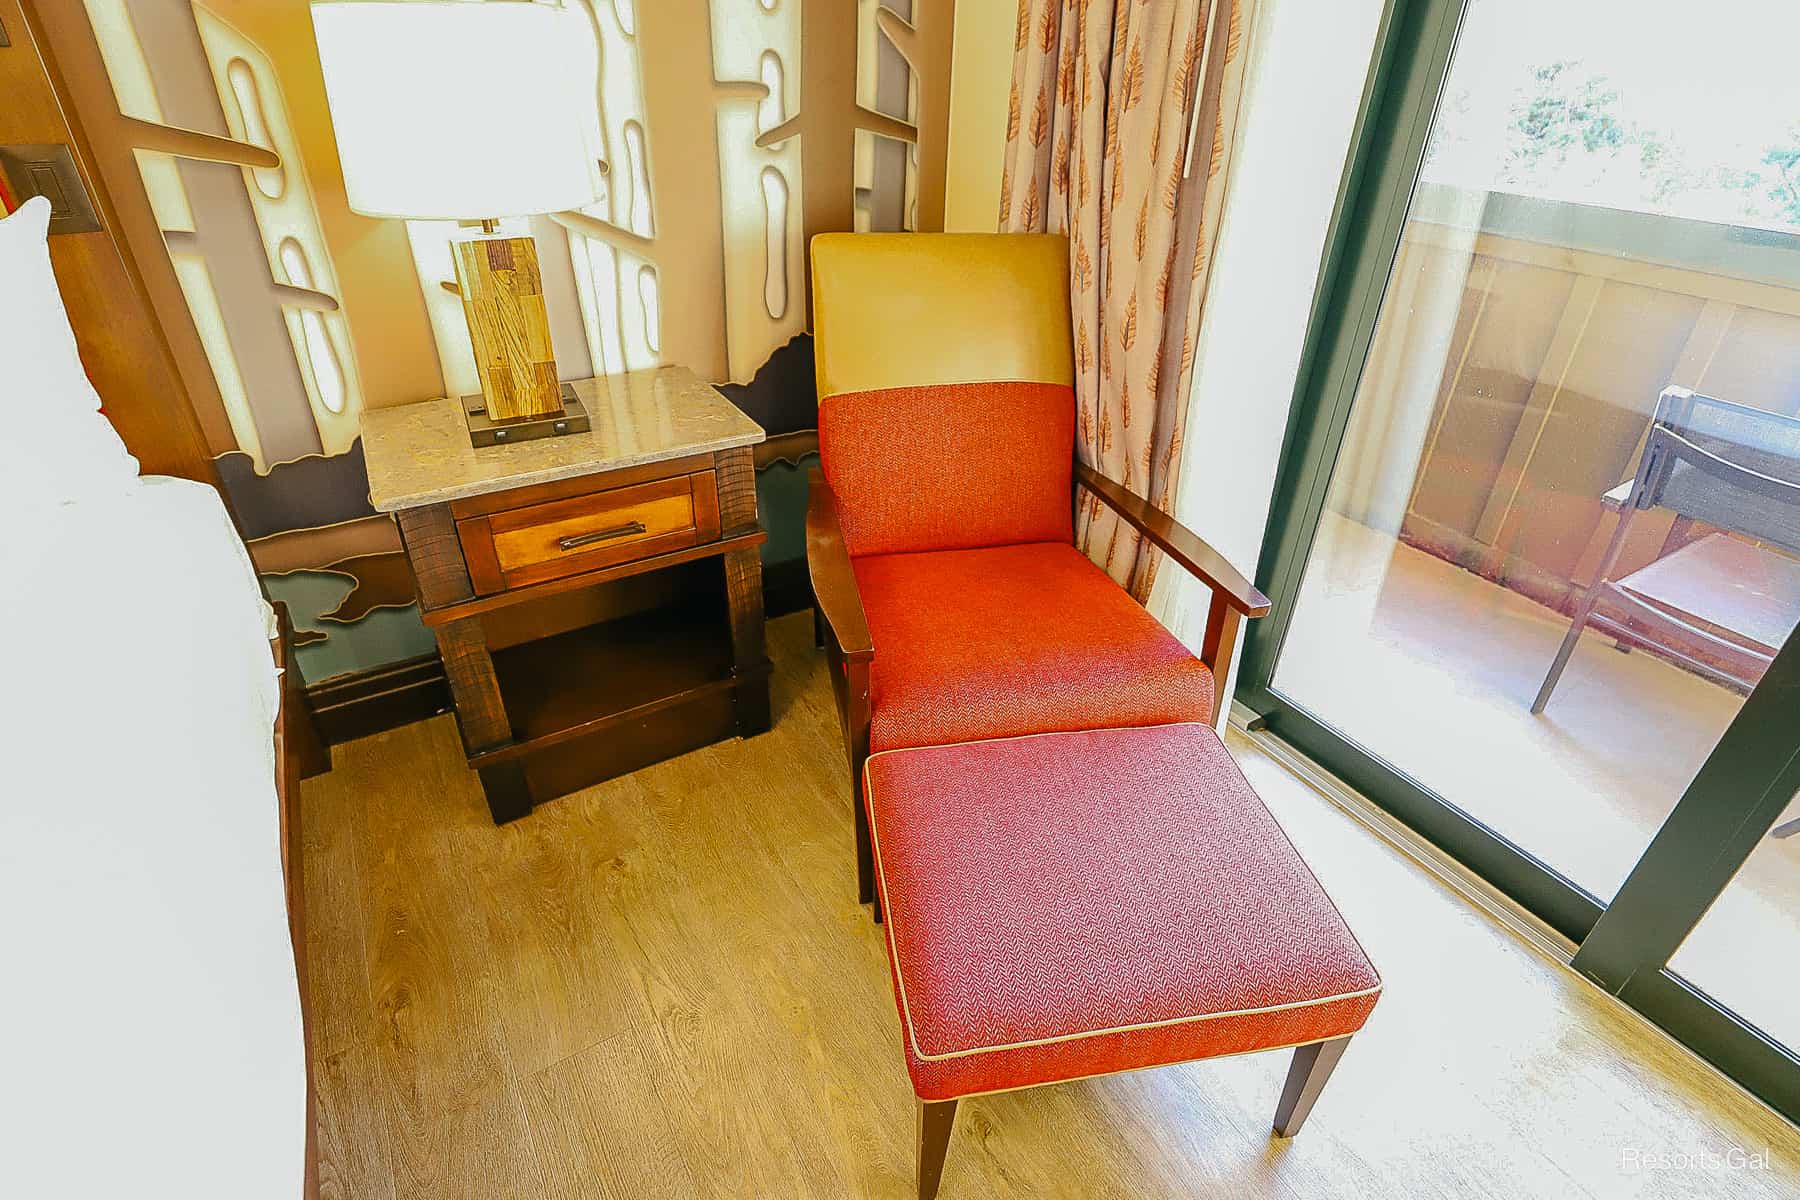 a close up of the red chair with foot stool trimmed in gold